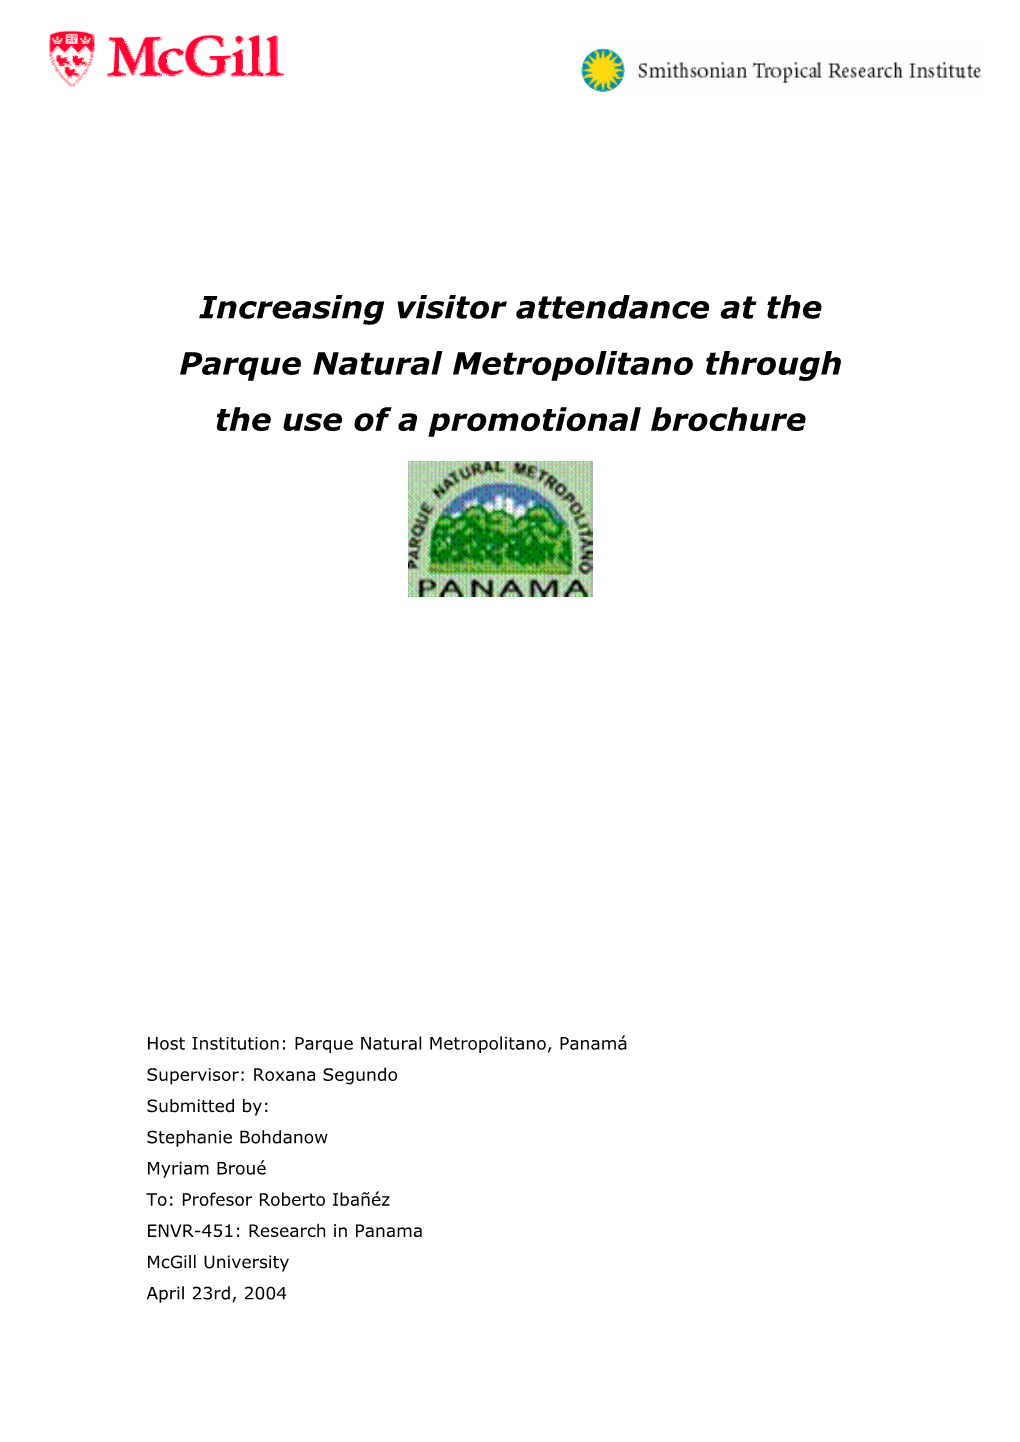 Increasing Visitor Attendance at the Parque Natural Metropolitano Through the Use of a Promotional Brochure